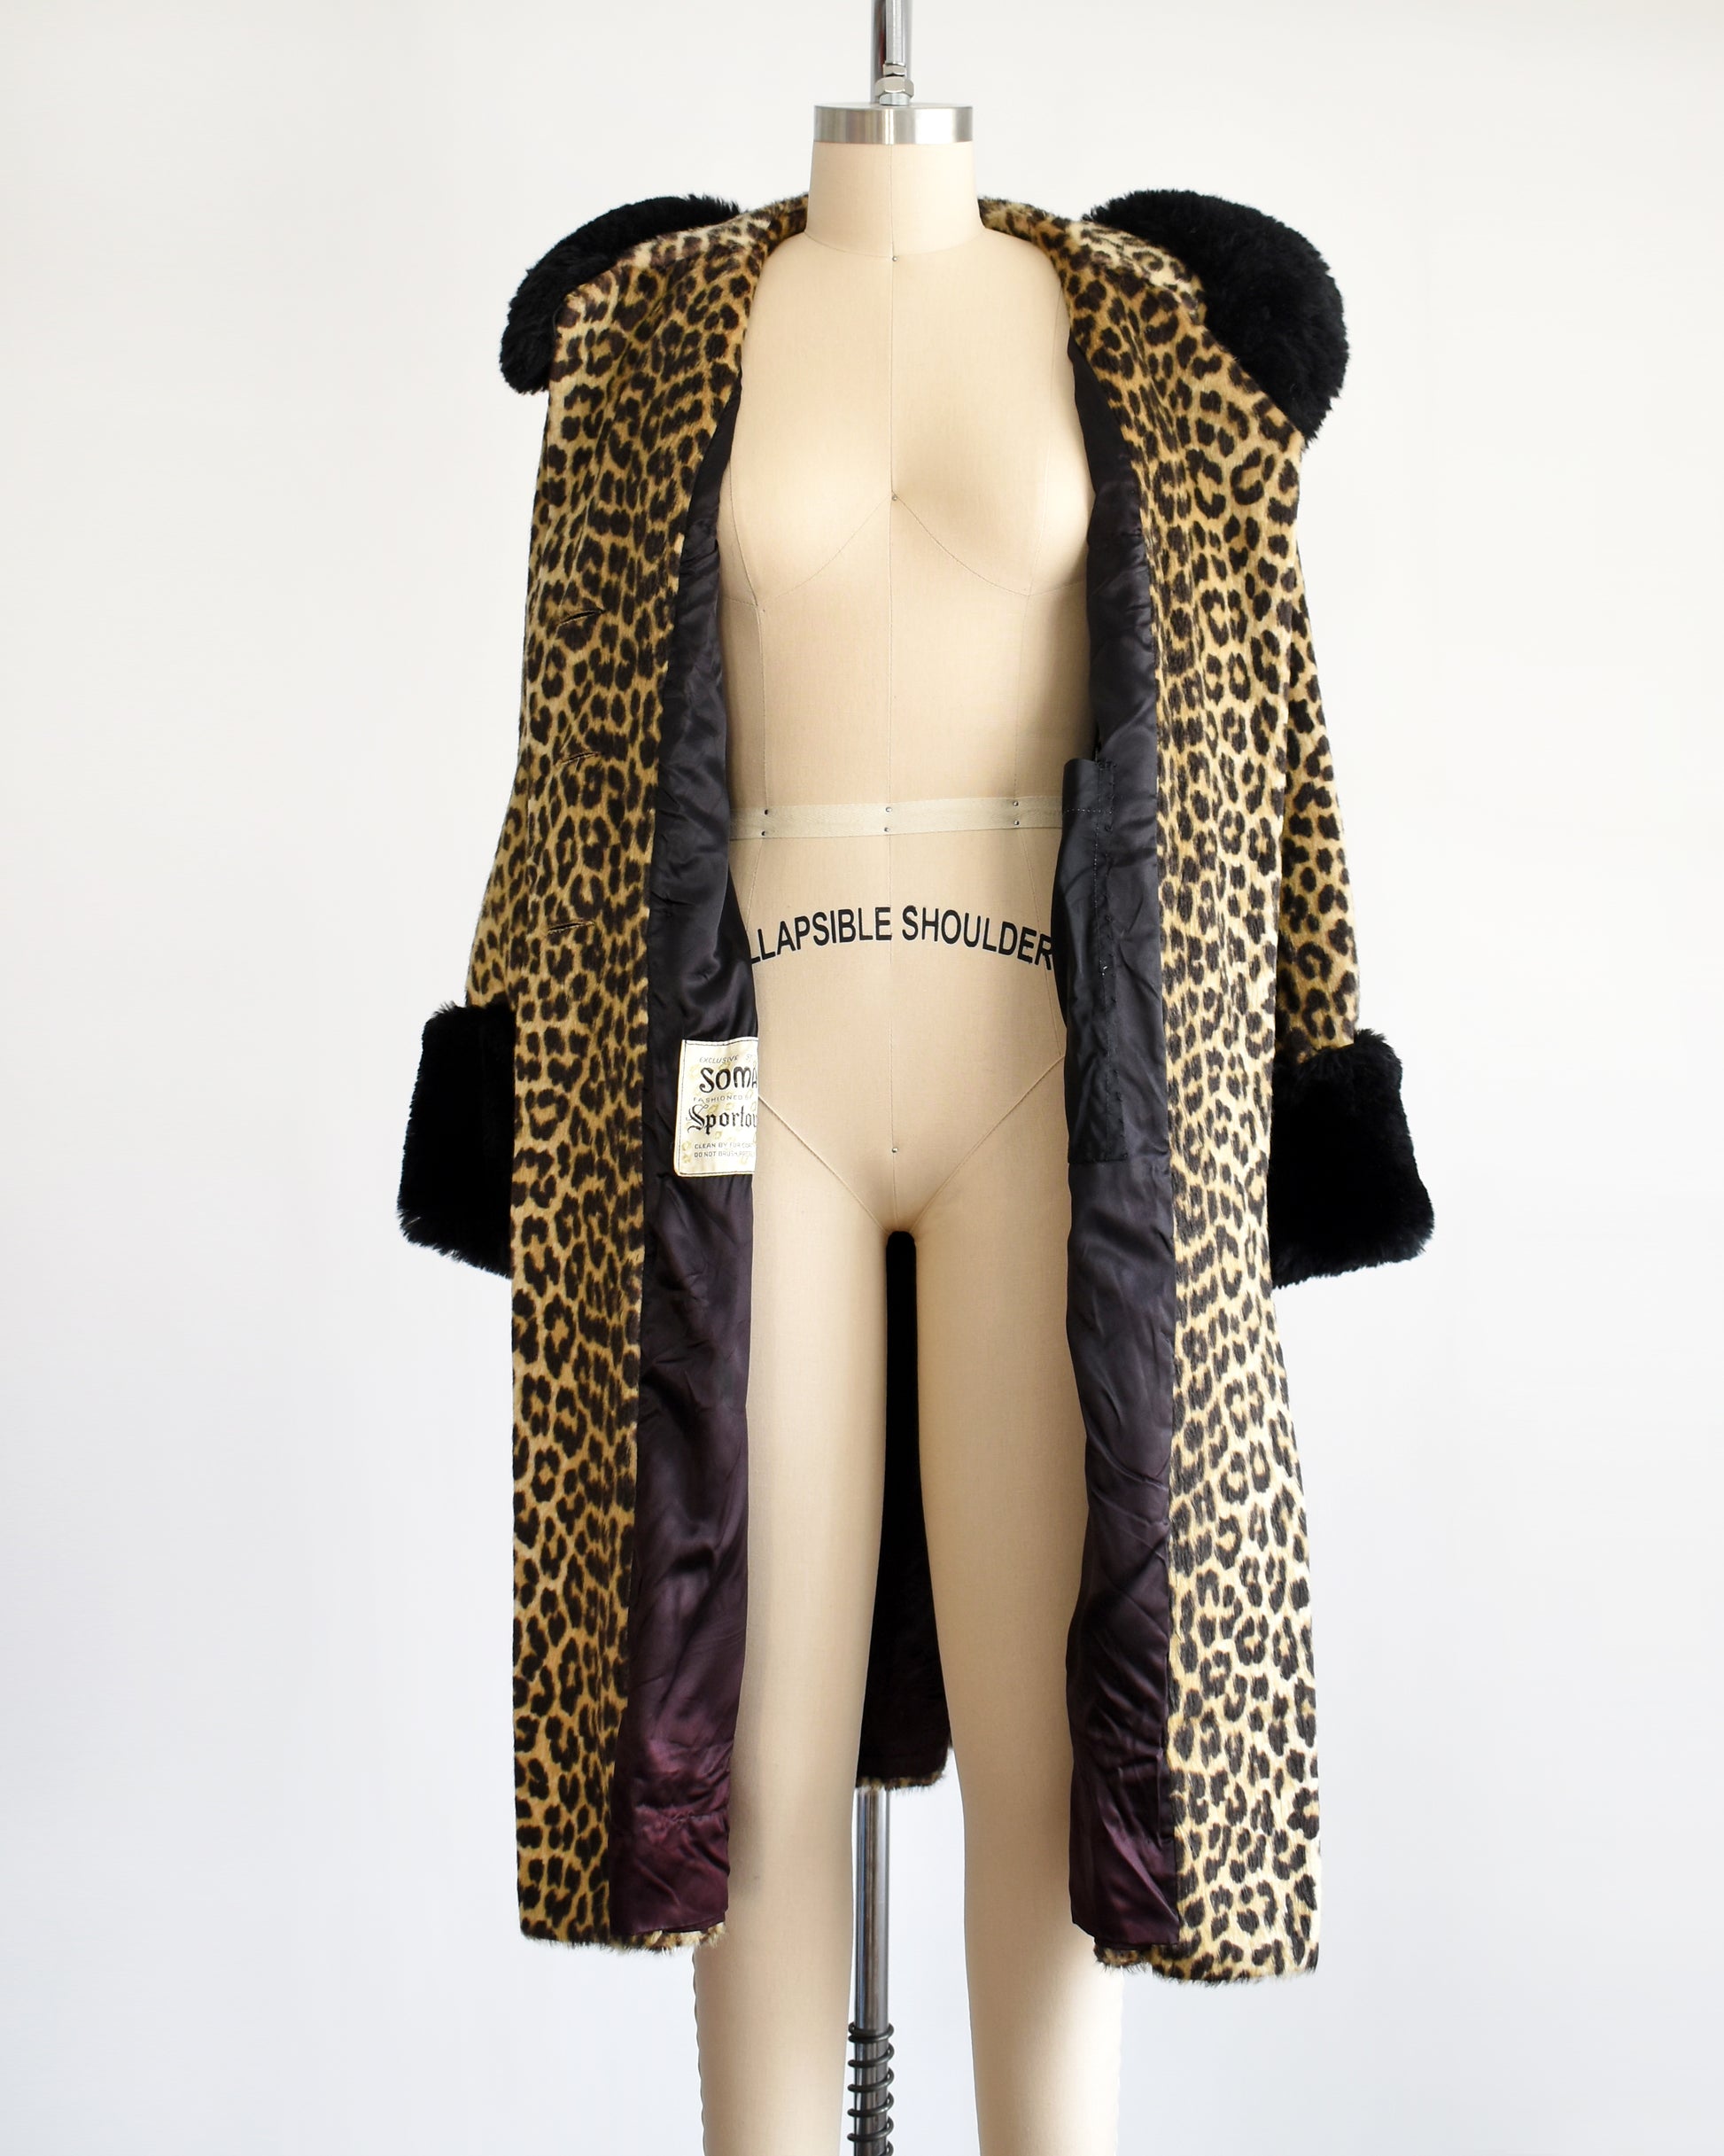 A vintage 1960s faux fur leopard print coat. Black plush trim along the collar and on the cuffs. The coat is open in this photo